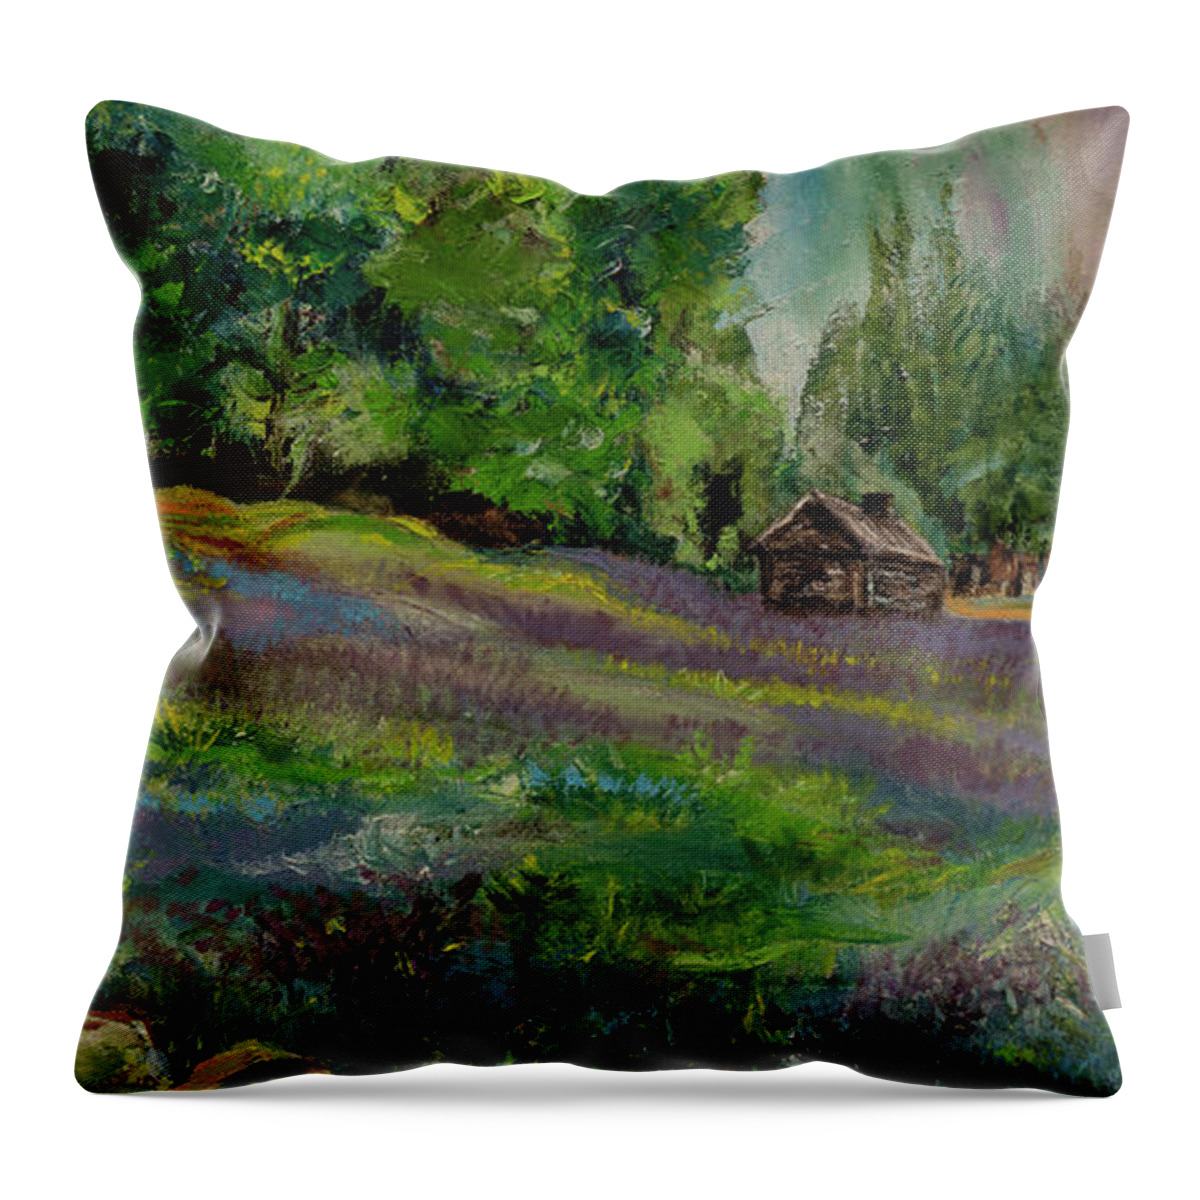 Art And Impressionism. Scottish Landscape Throw Pillow featuring the painting Scottish Landscape by Kathy Knopp